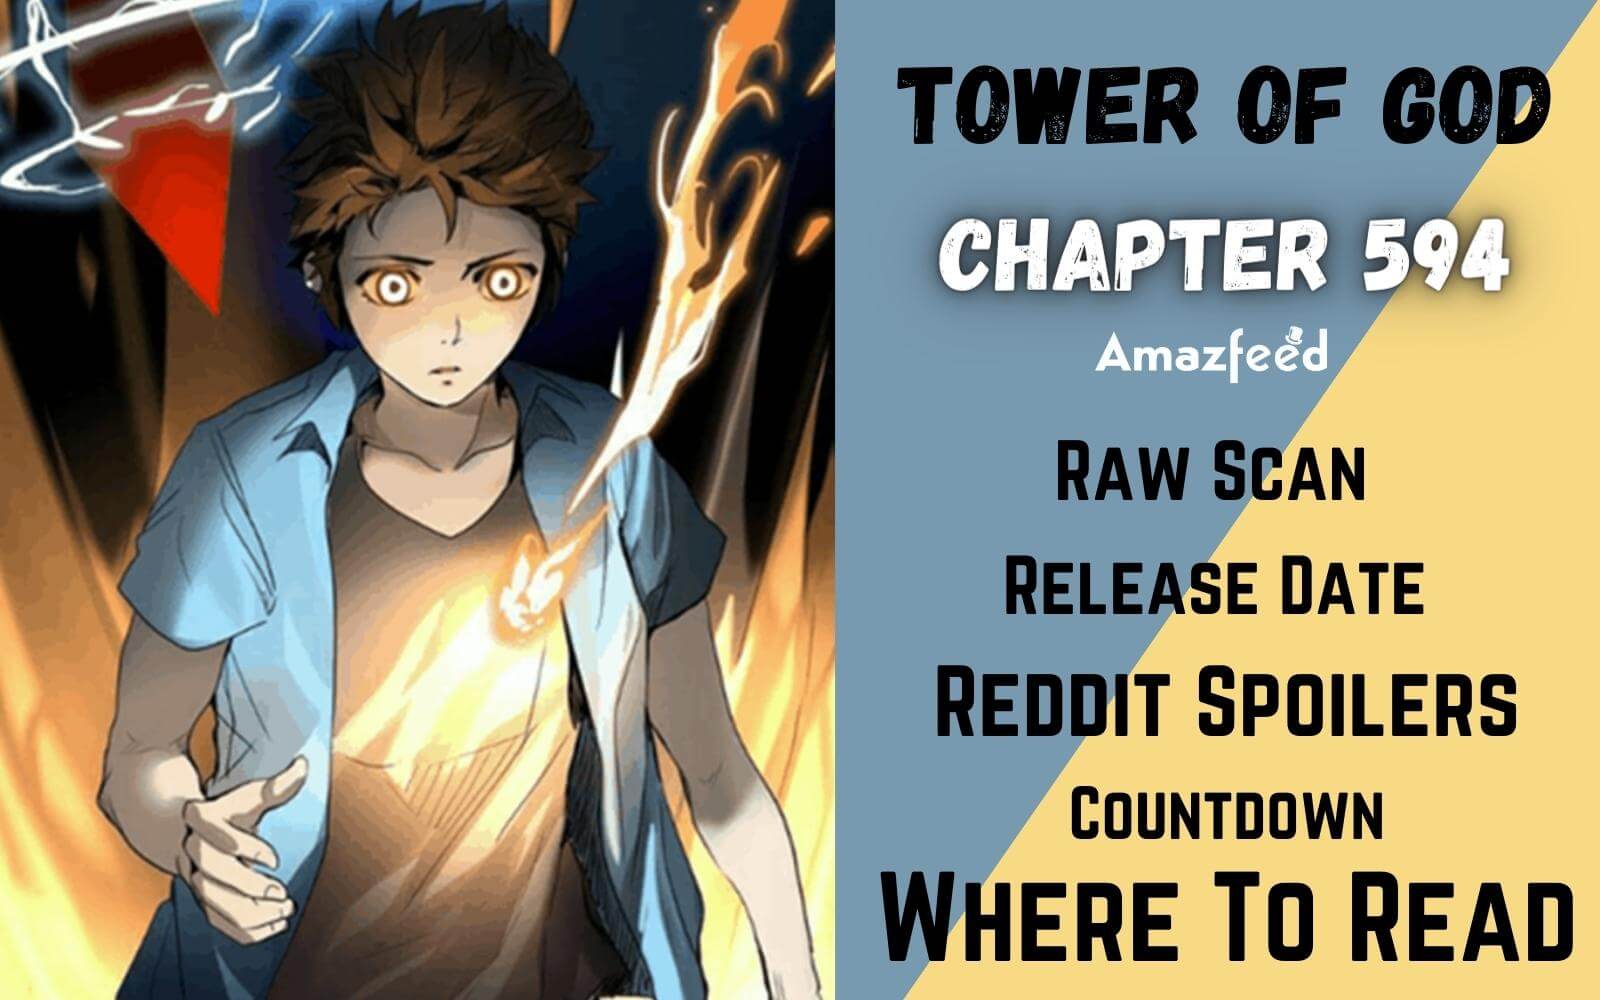 Kami no Tou Tower Of God Anime Episode 4 Release Date, Spoilers